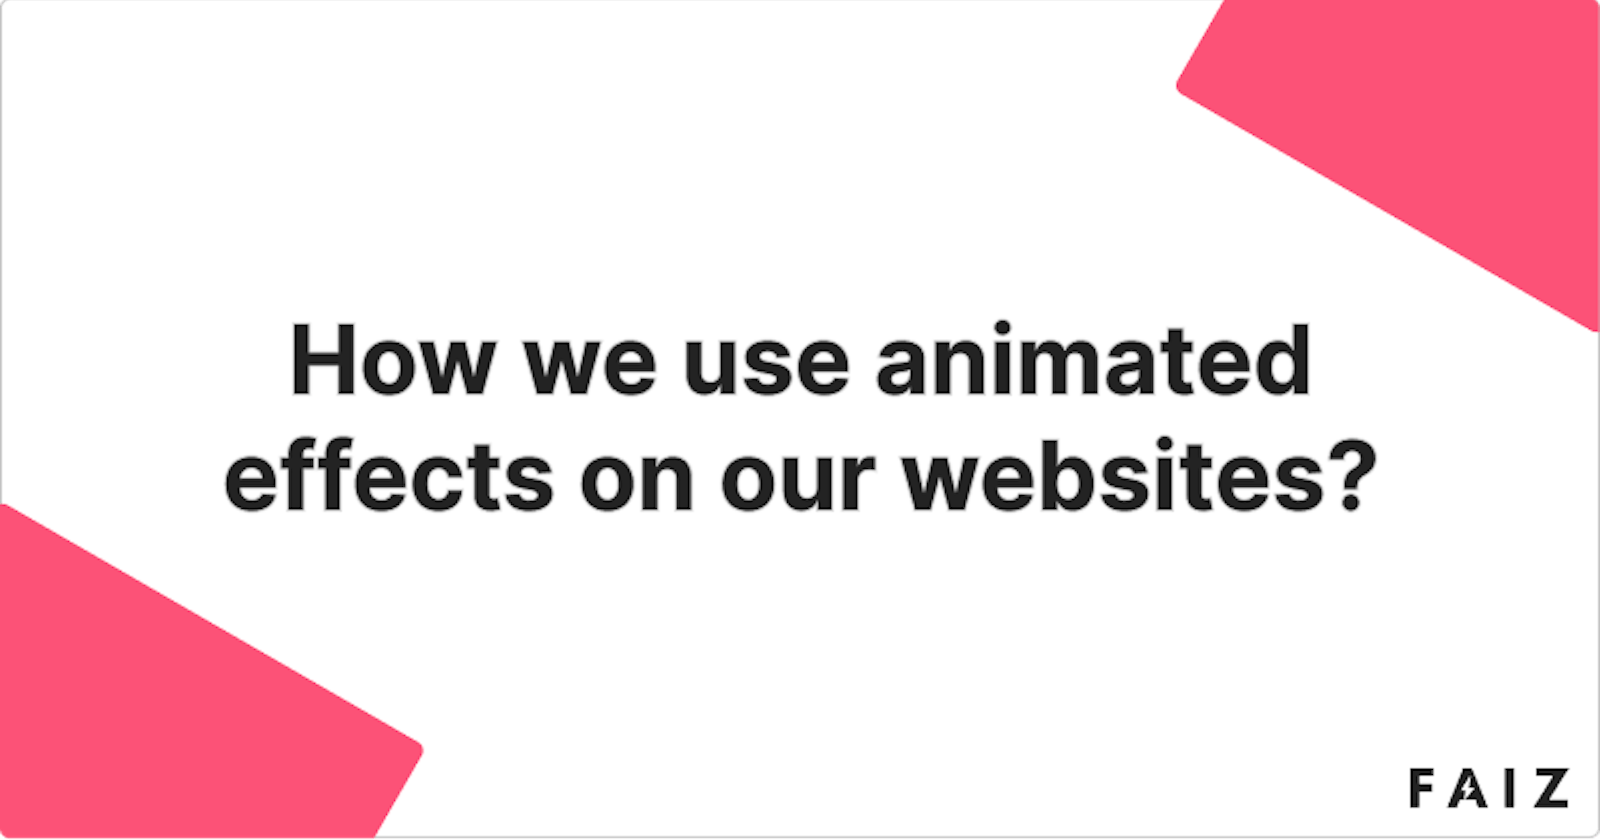 How we use animated effects on our websites?